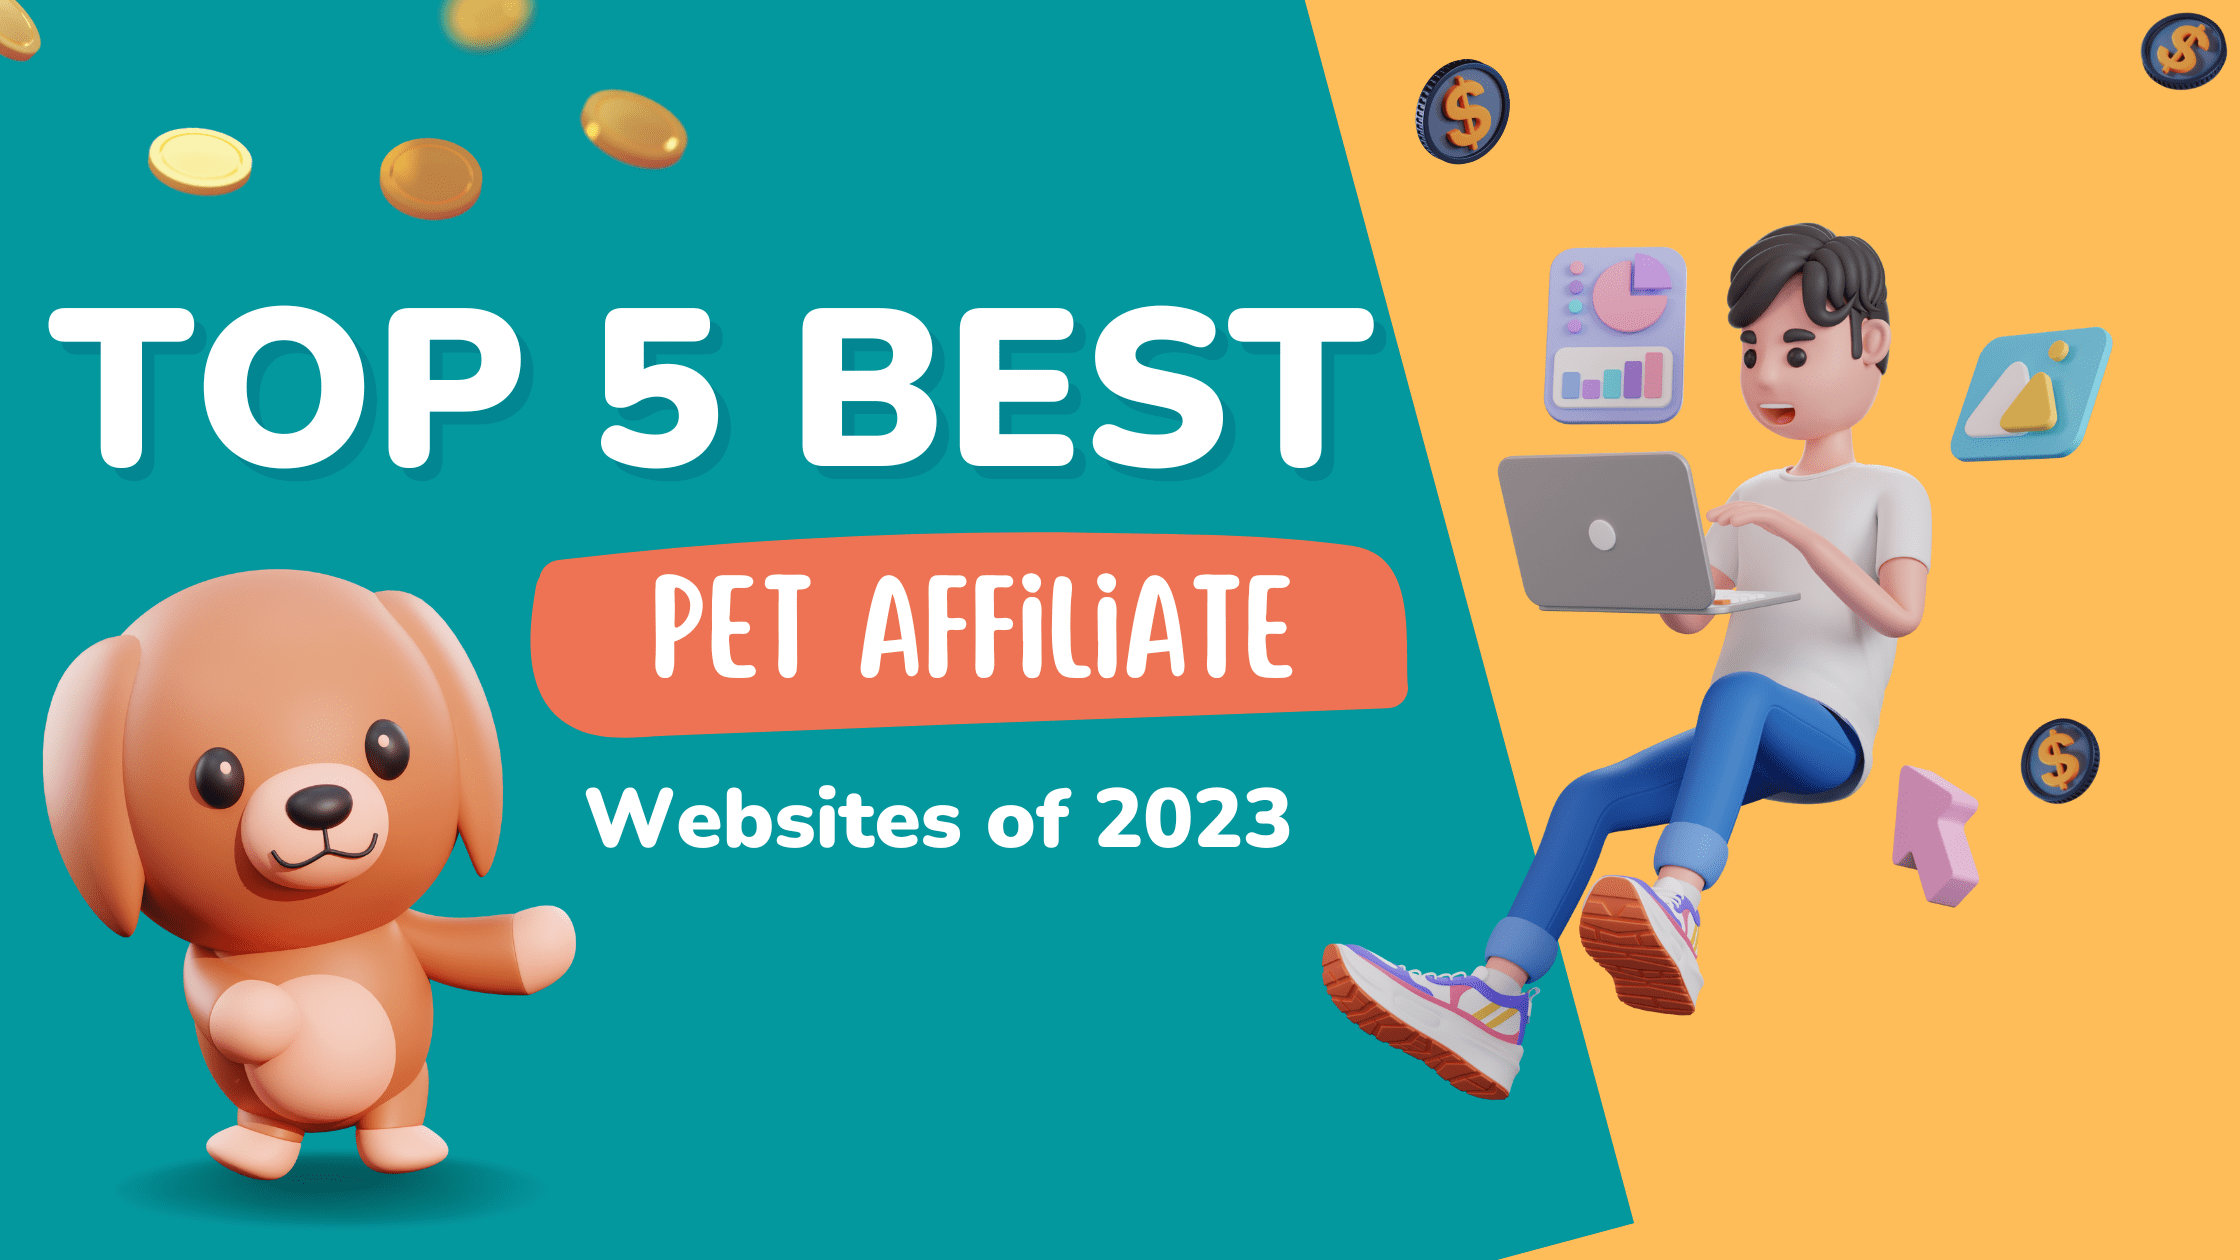 Best Pet Affiliate Websites to Join - Earn More with These Top-Rated Programs